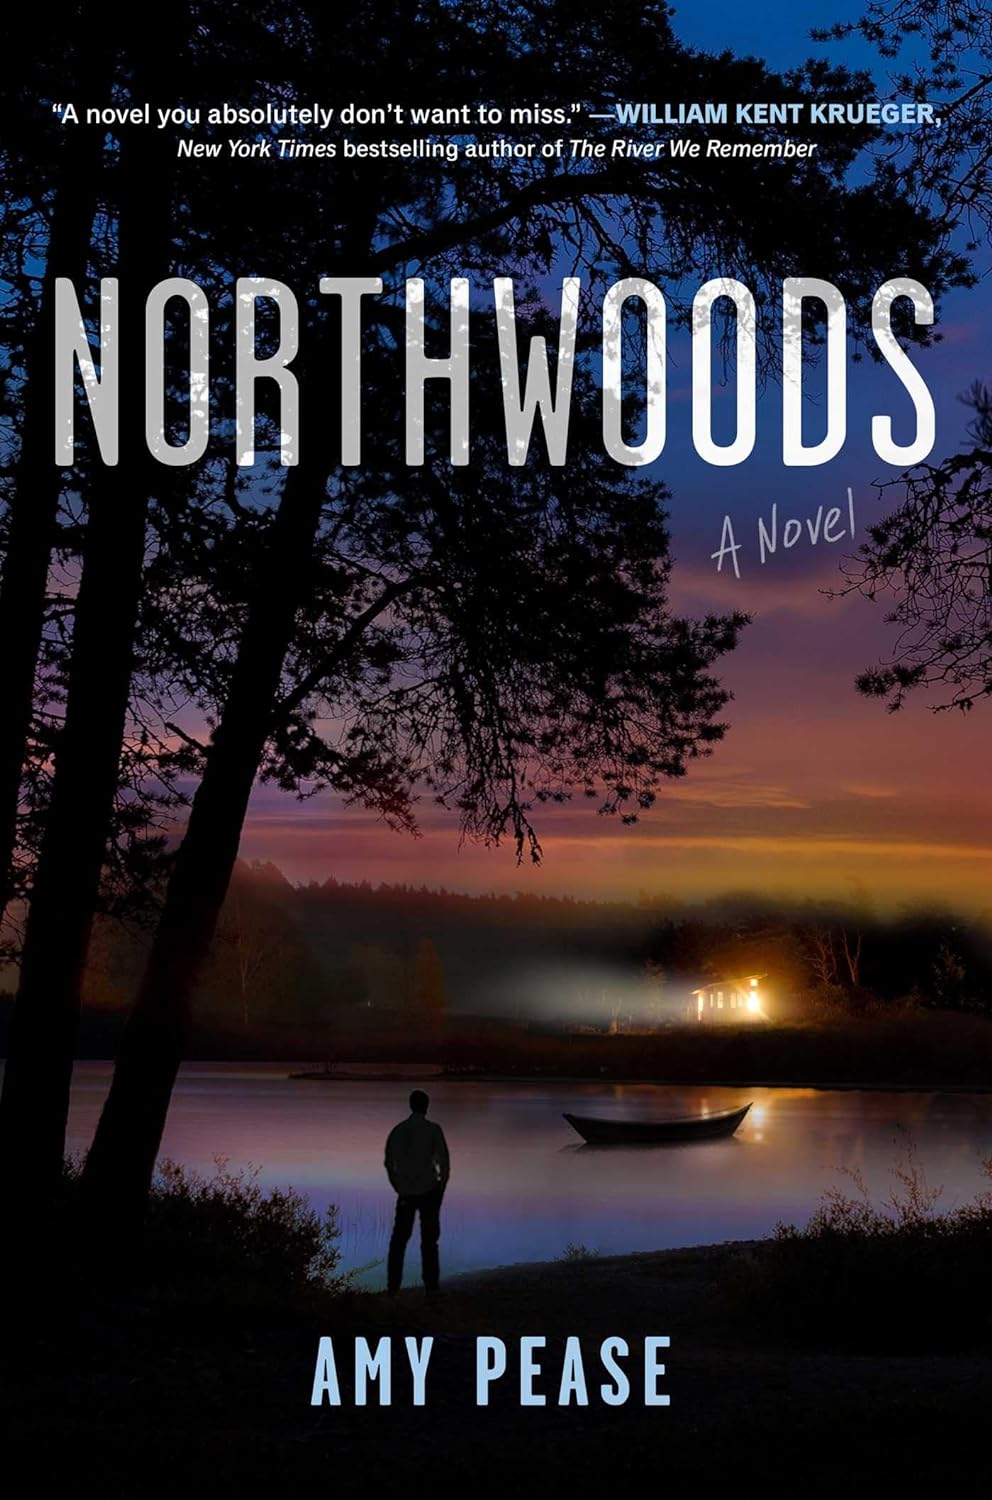 Image for "Northwoods"